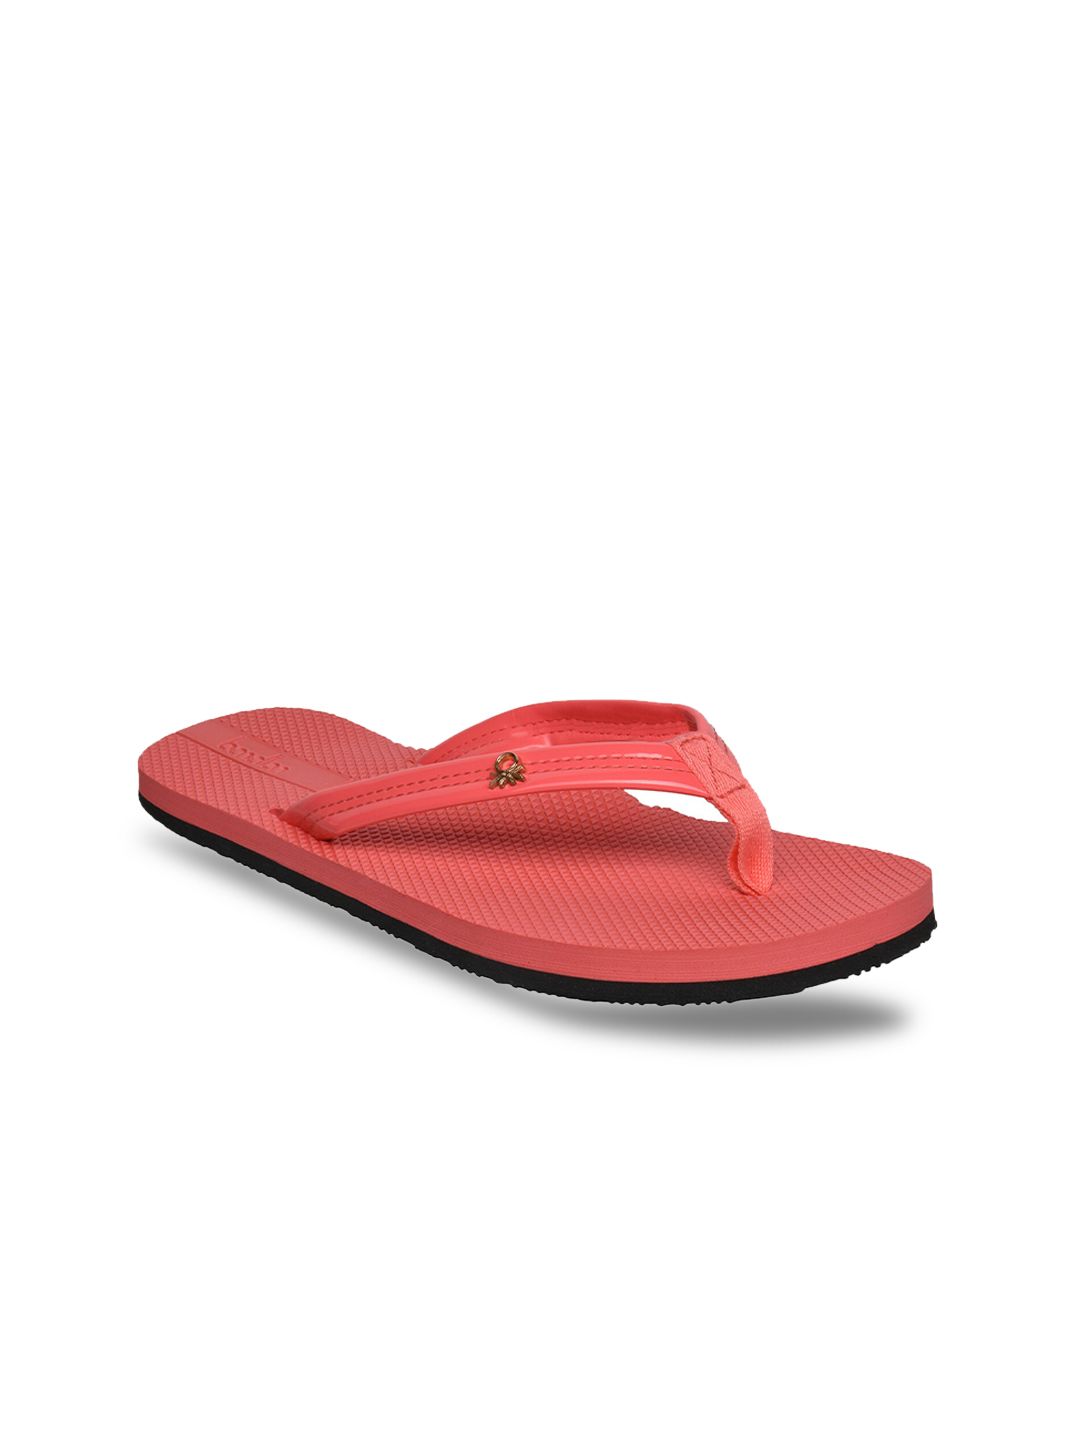 United Colors of Benetton Women Peach-Coloured & Black Self Design Rubber Thong Flip-Flops Price in India